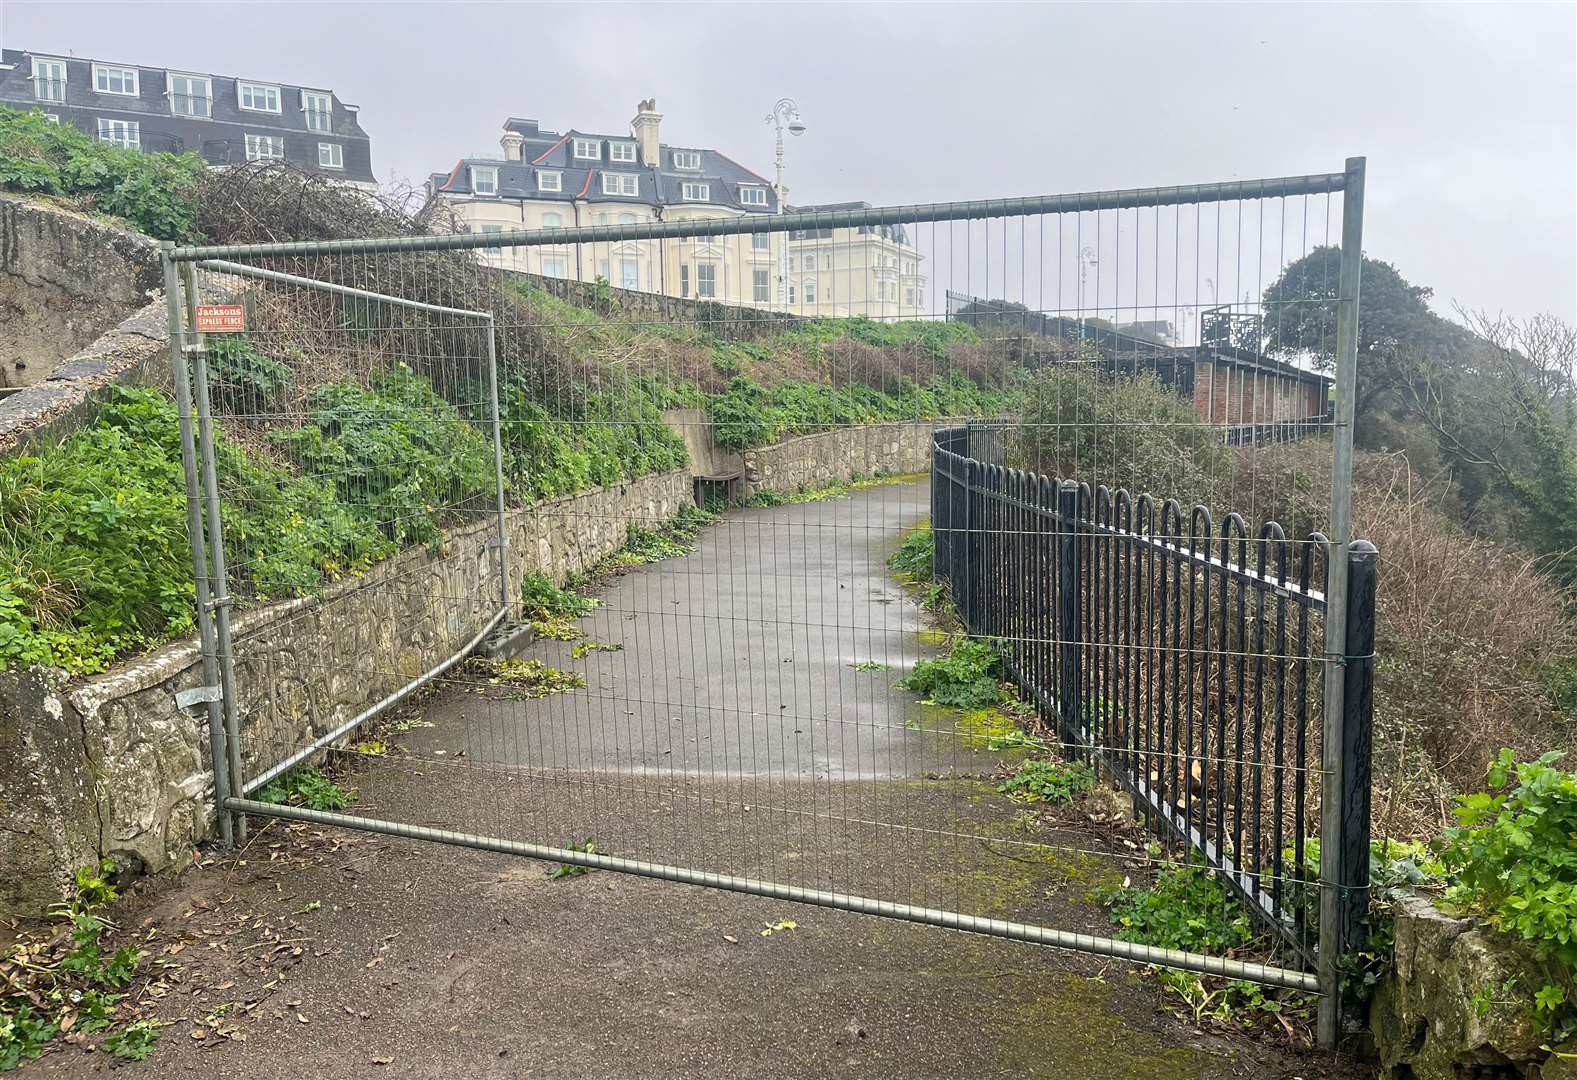 The closure on The Leas follows fears for public safety for the adventure playground directly below the coastal path.